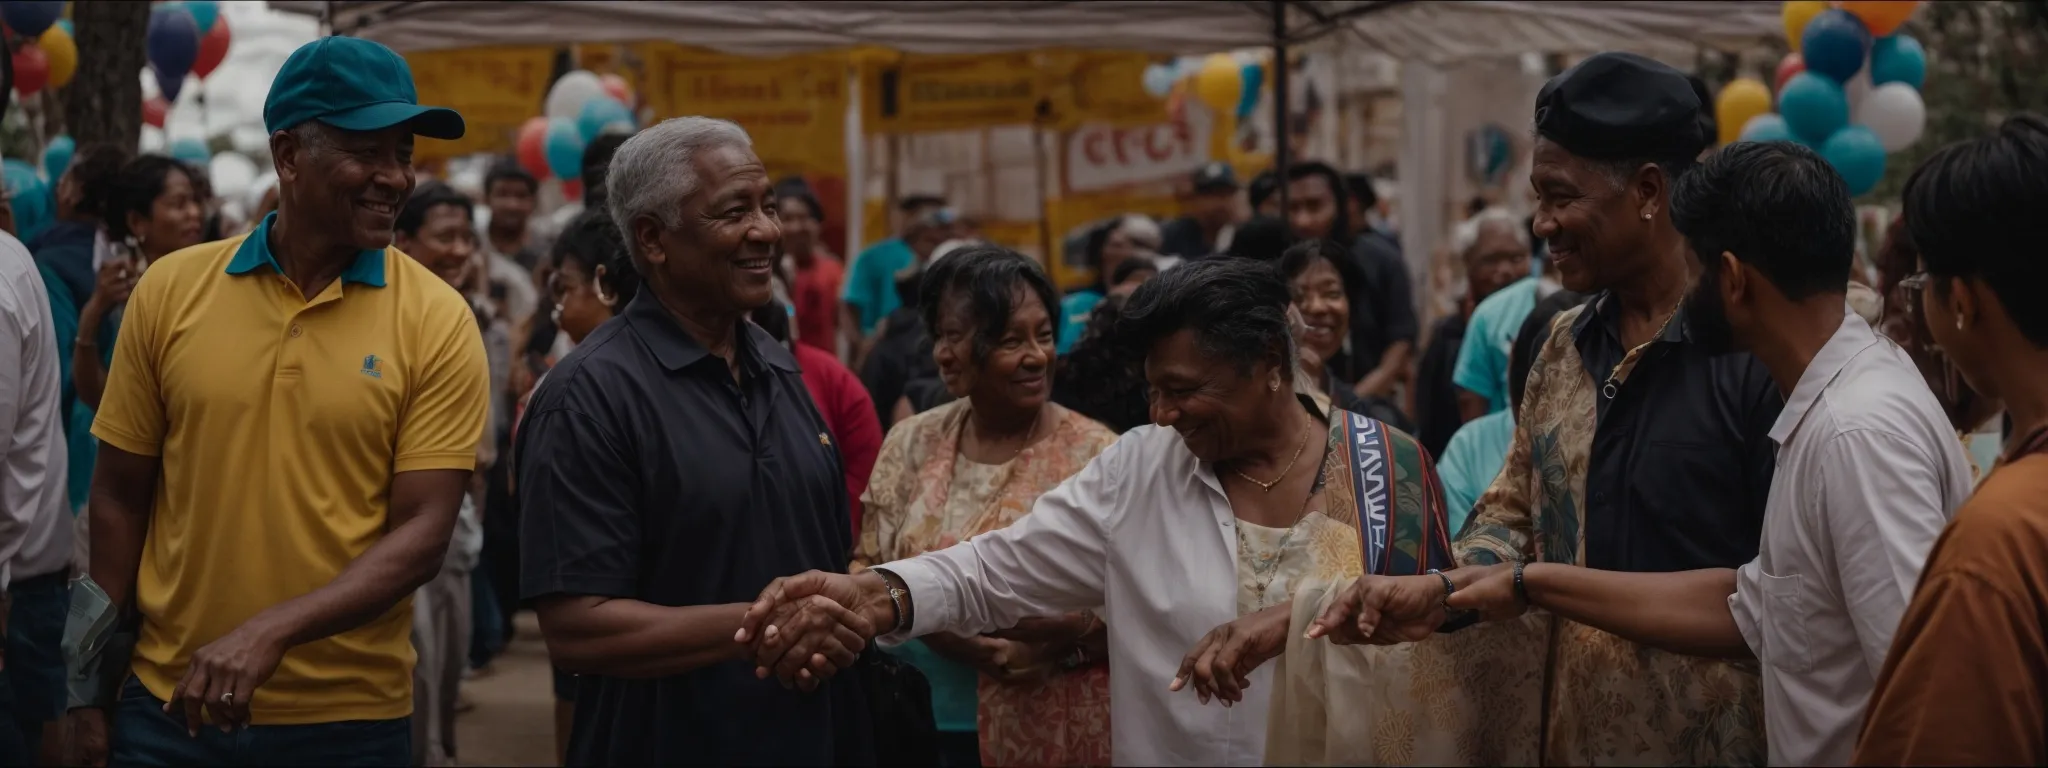 a local business owner shaking hands with residents at a community event.